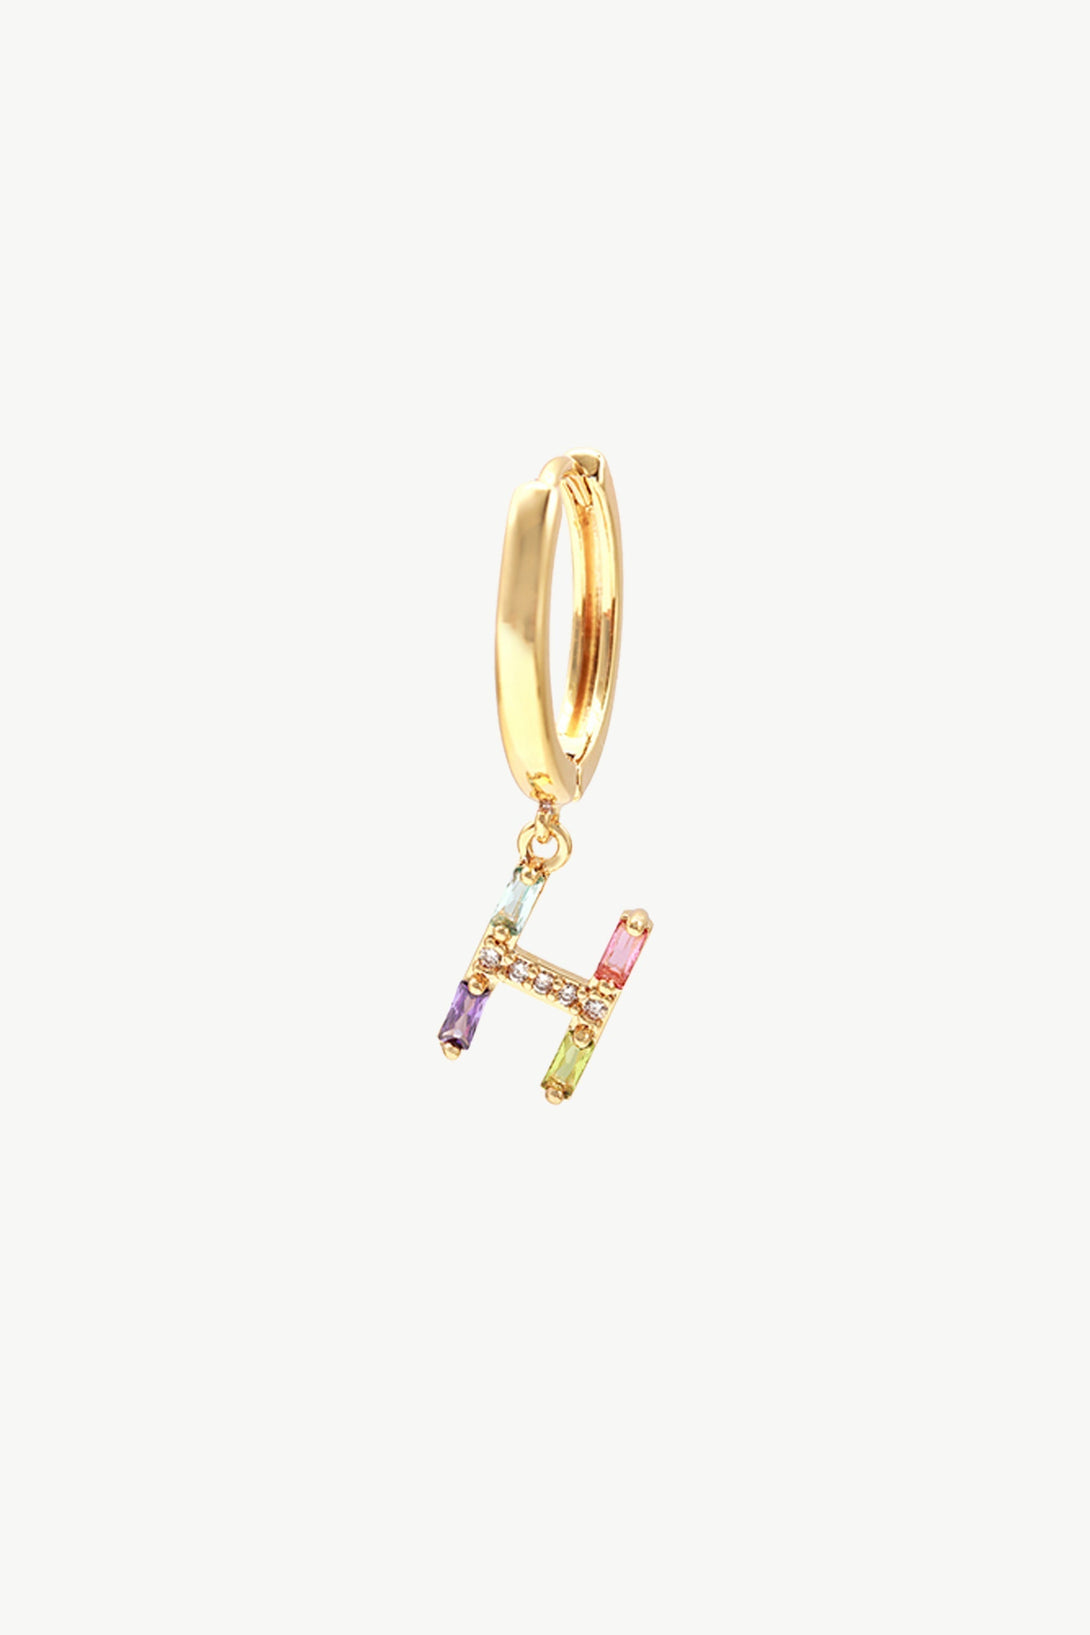 Single Gold Pavé Initial Charm Drop Huggie Hoop Earring-Letter H - Classicharms